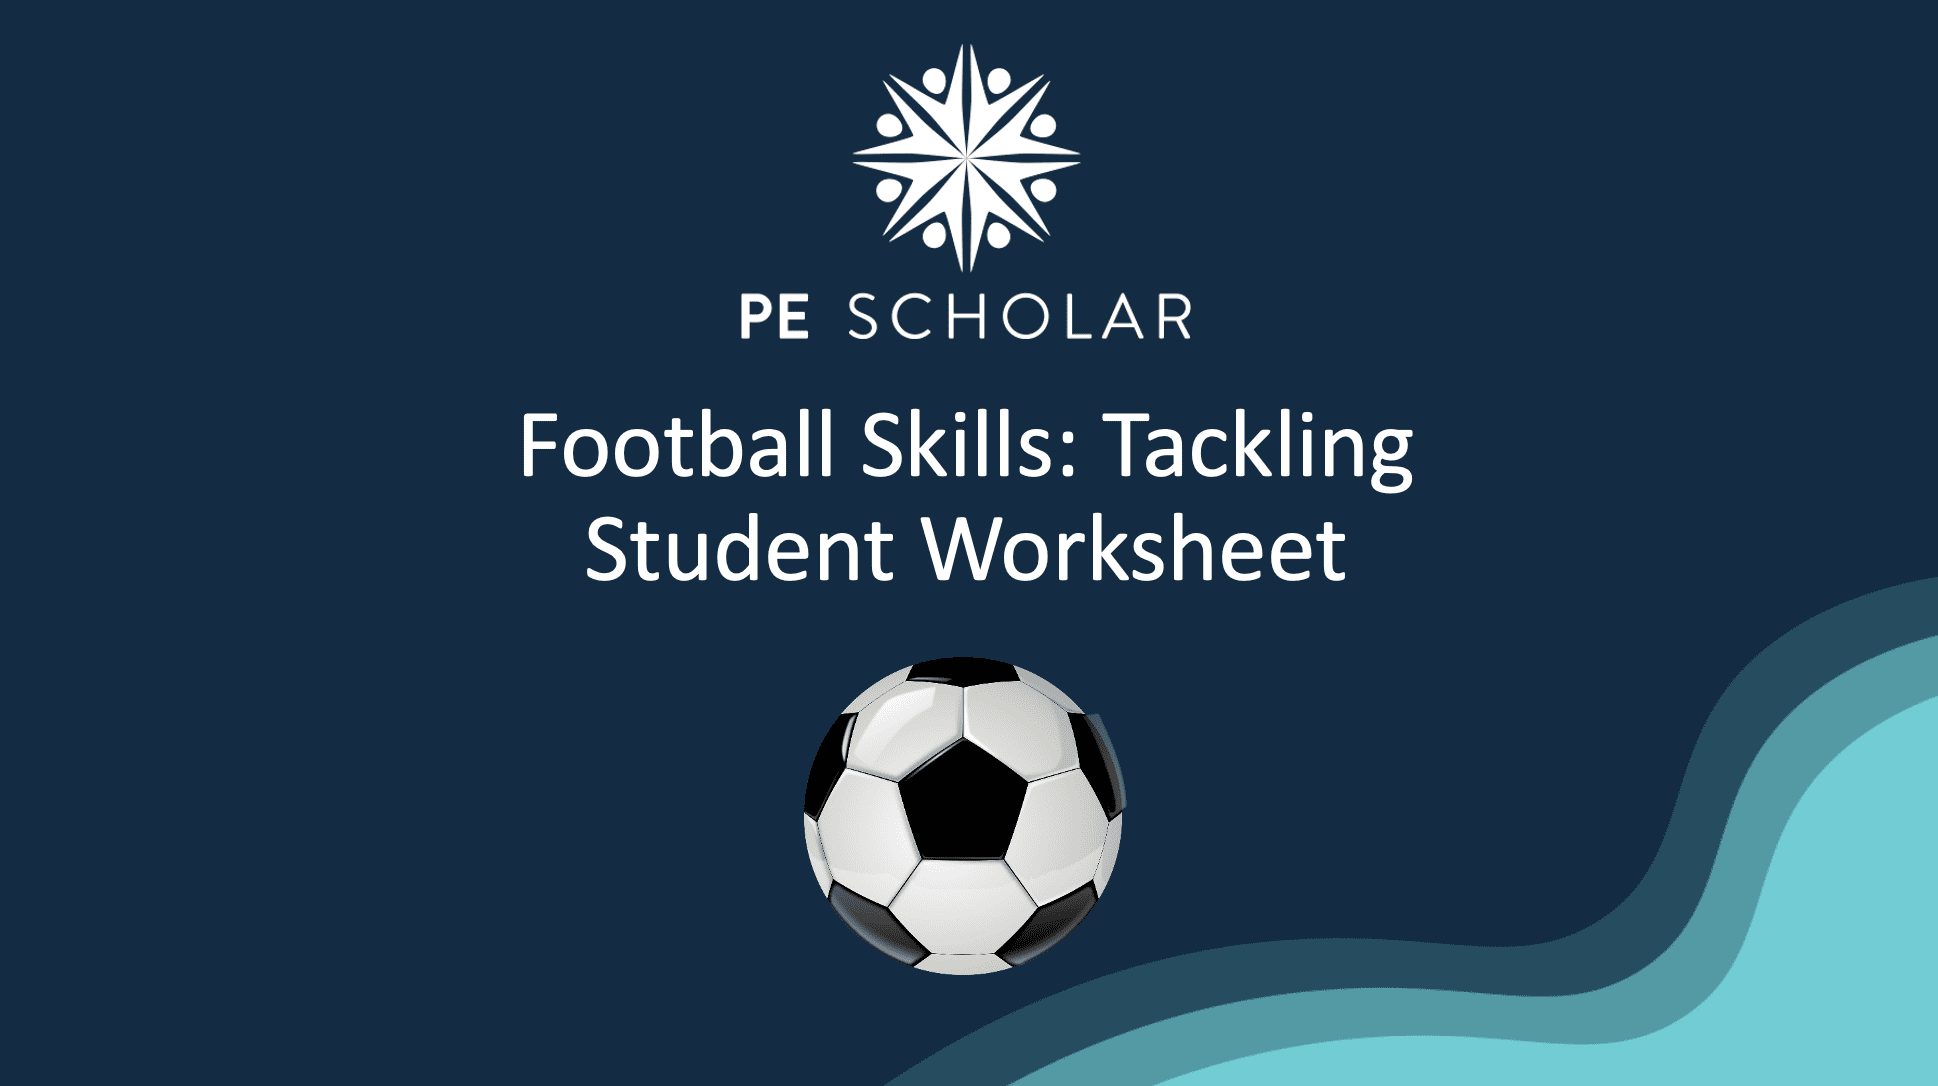 Featured image for “Football Skills: Tackling Student Worksheet”